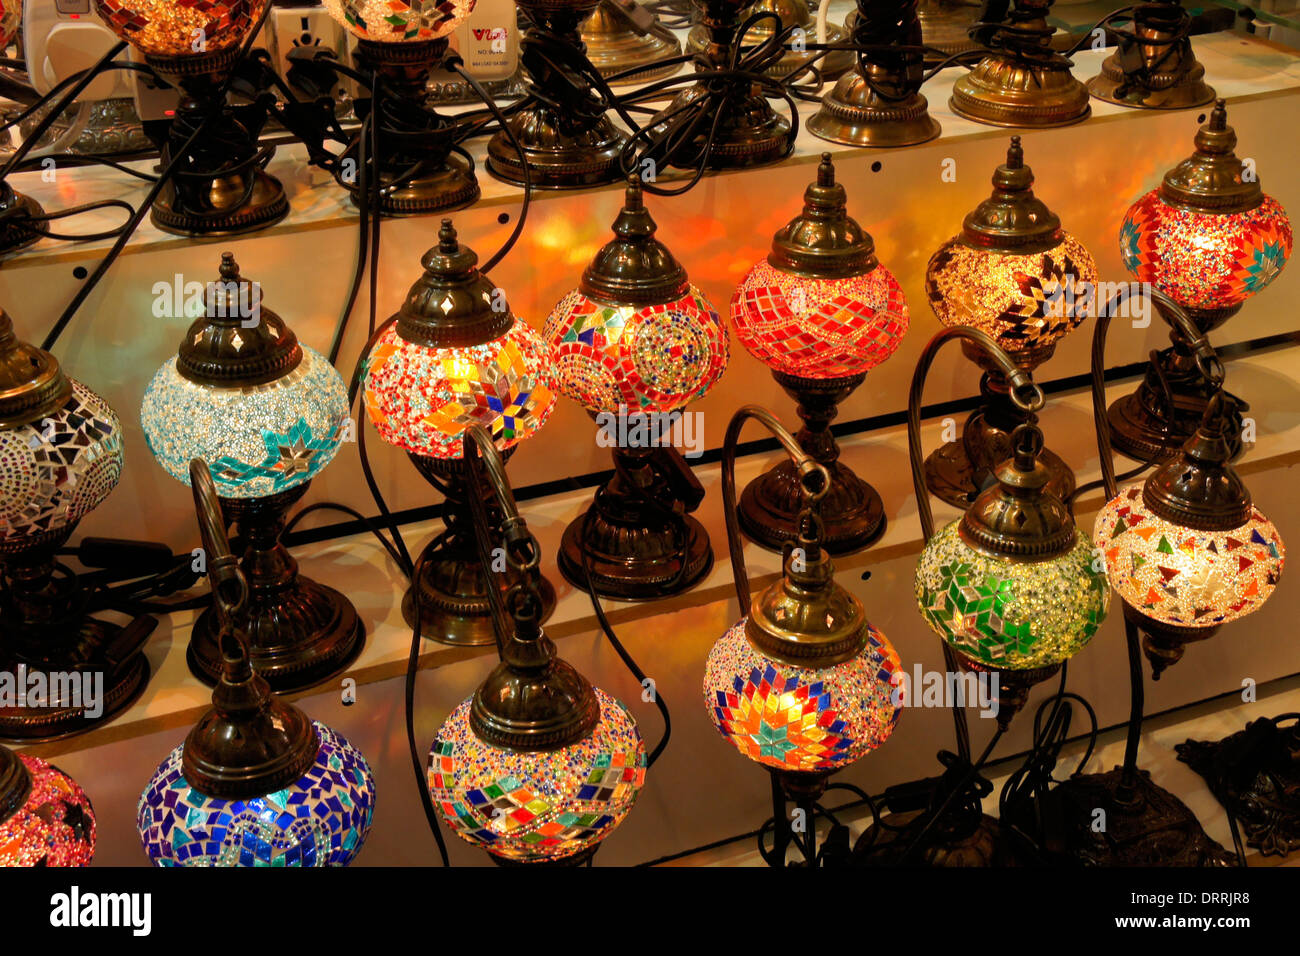 Colored glass lamps for sale in souk, Old Dubai, United Arab Emirates Stock  Photo - Alamy